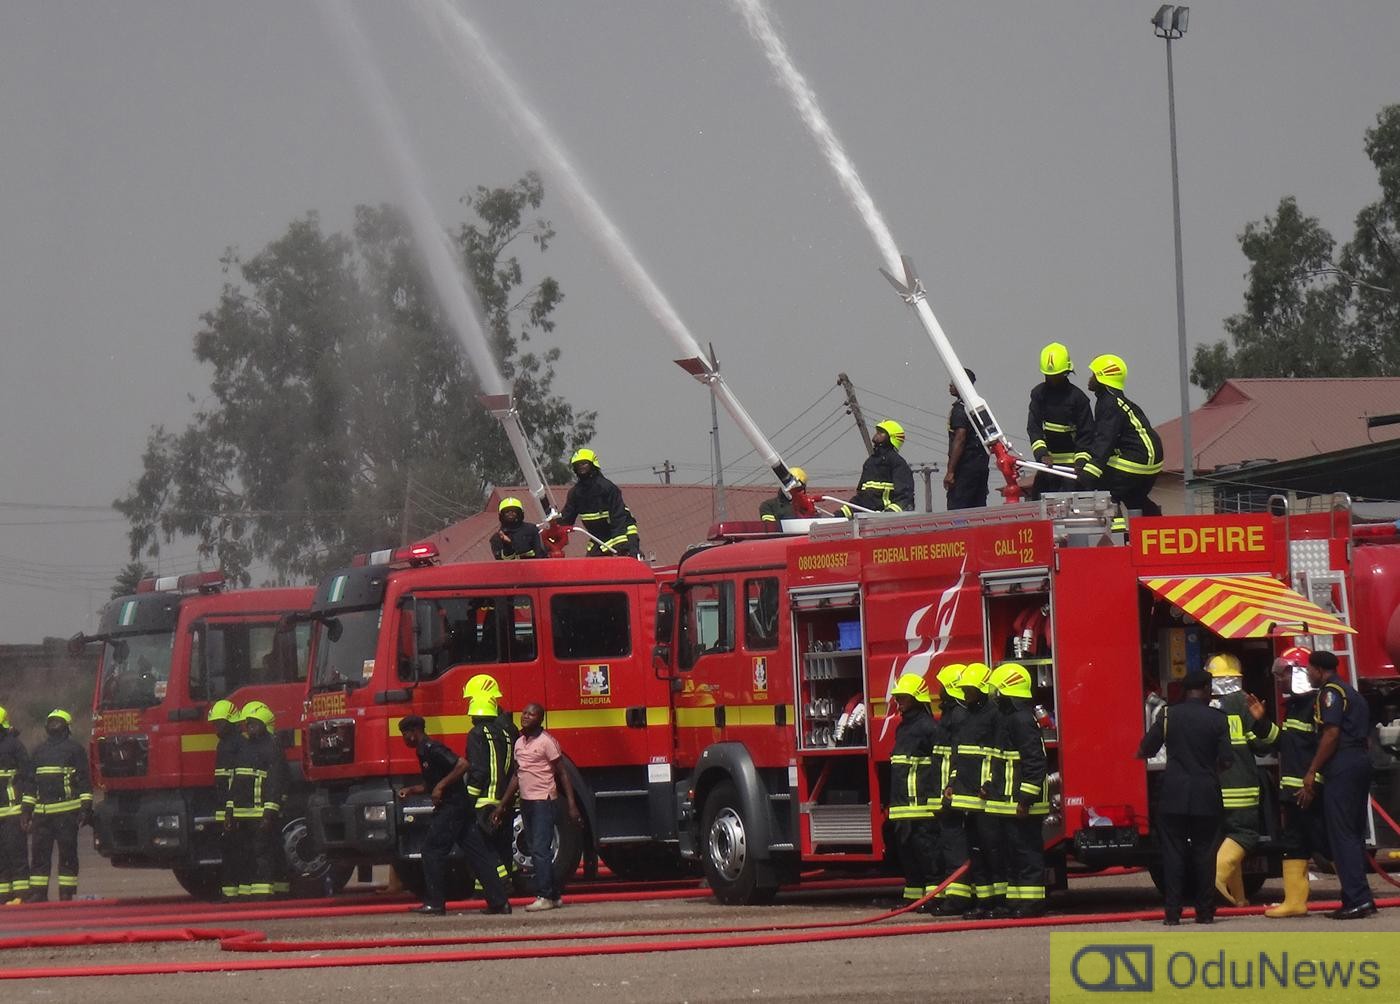 Lagos Sues 18 Year-Old For Raising False Alarm To Fire Service  